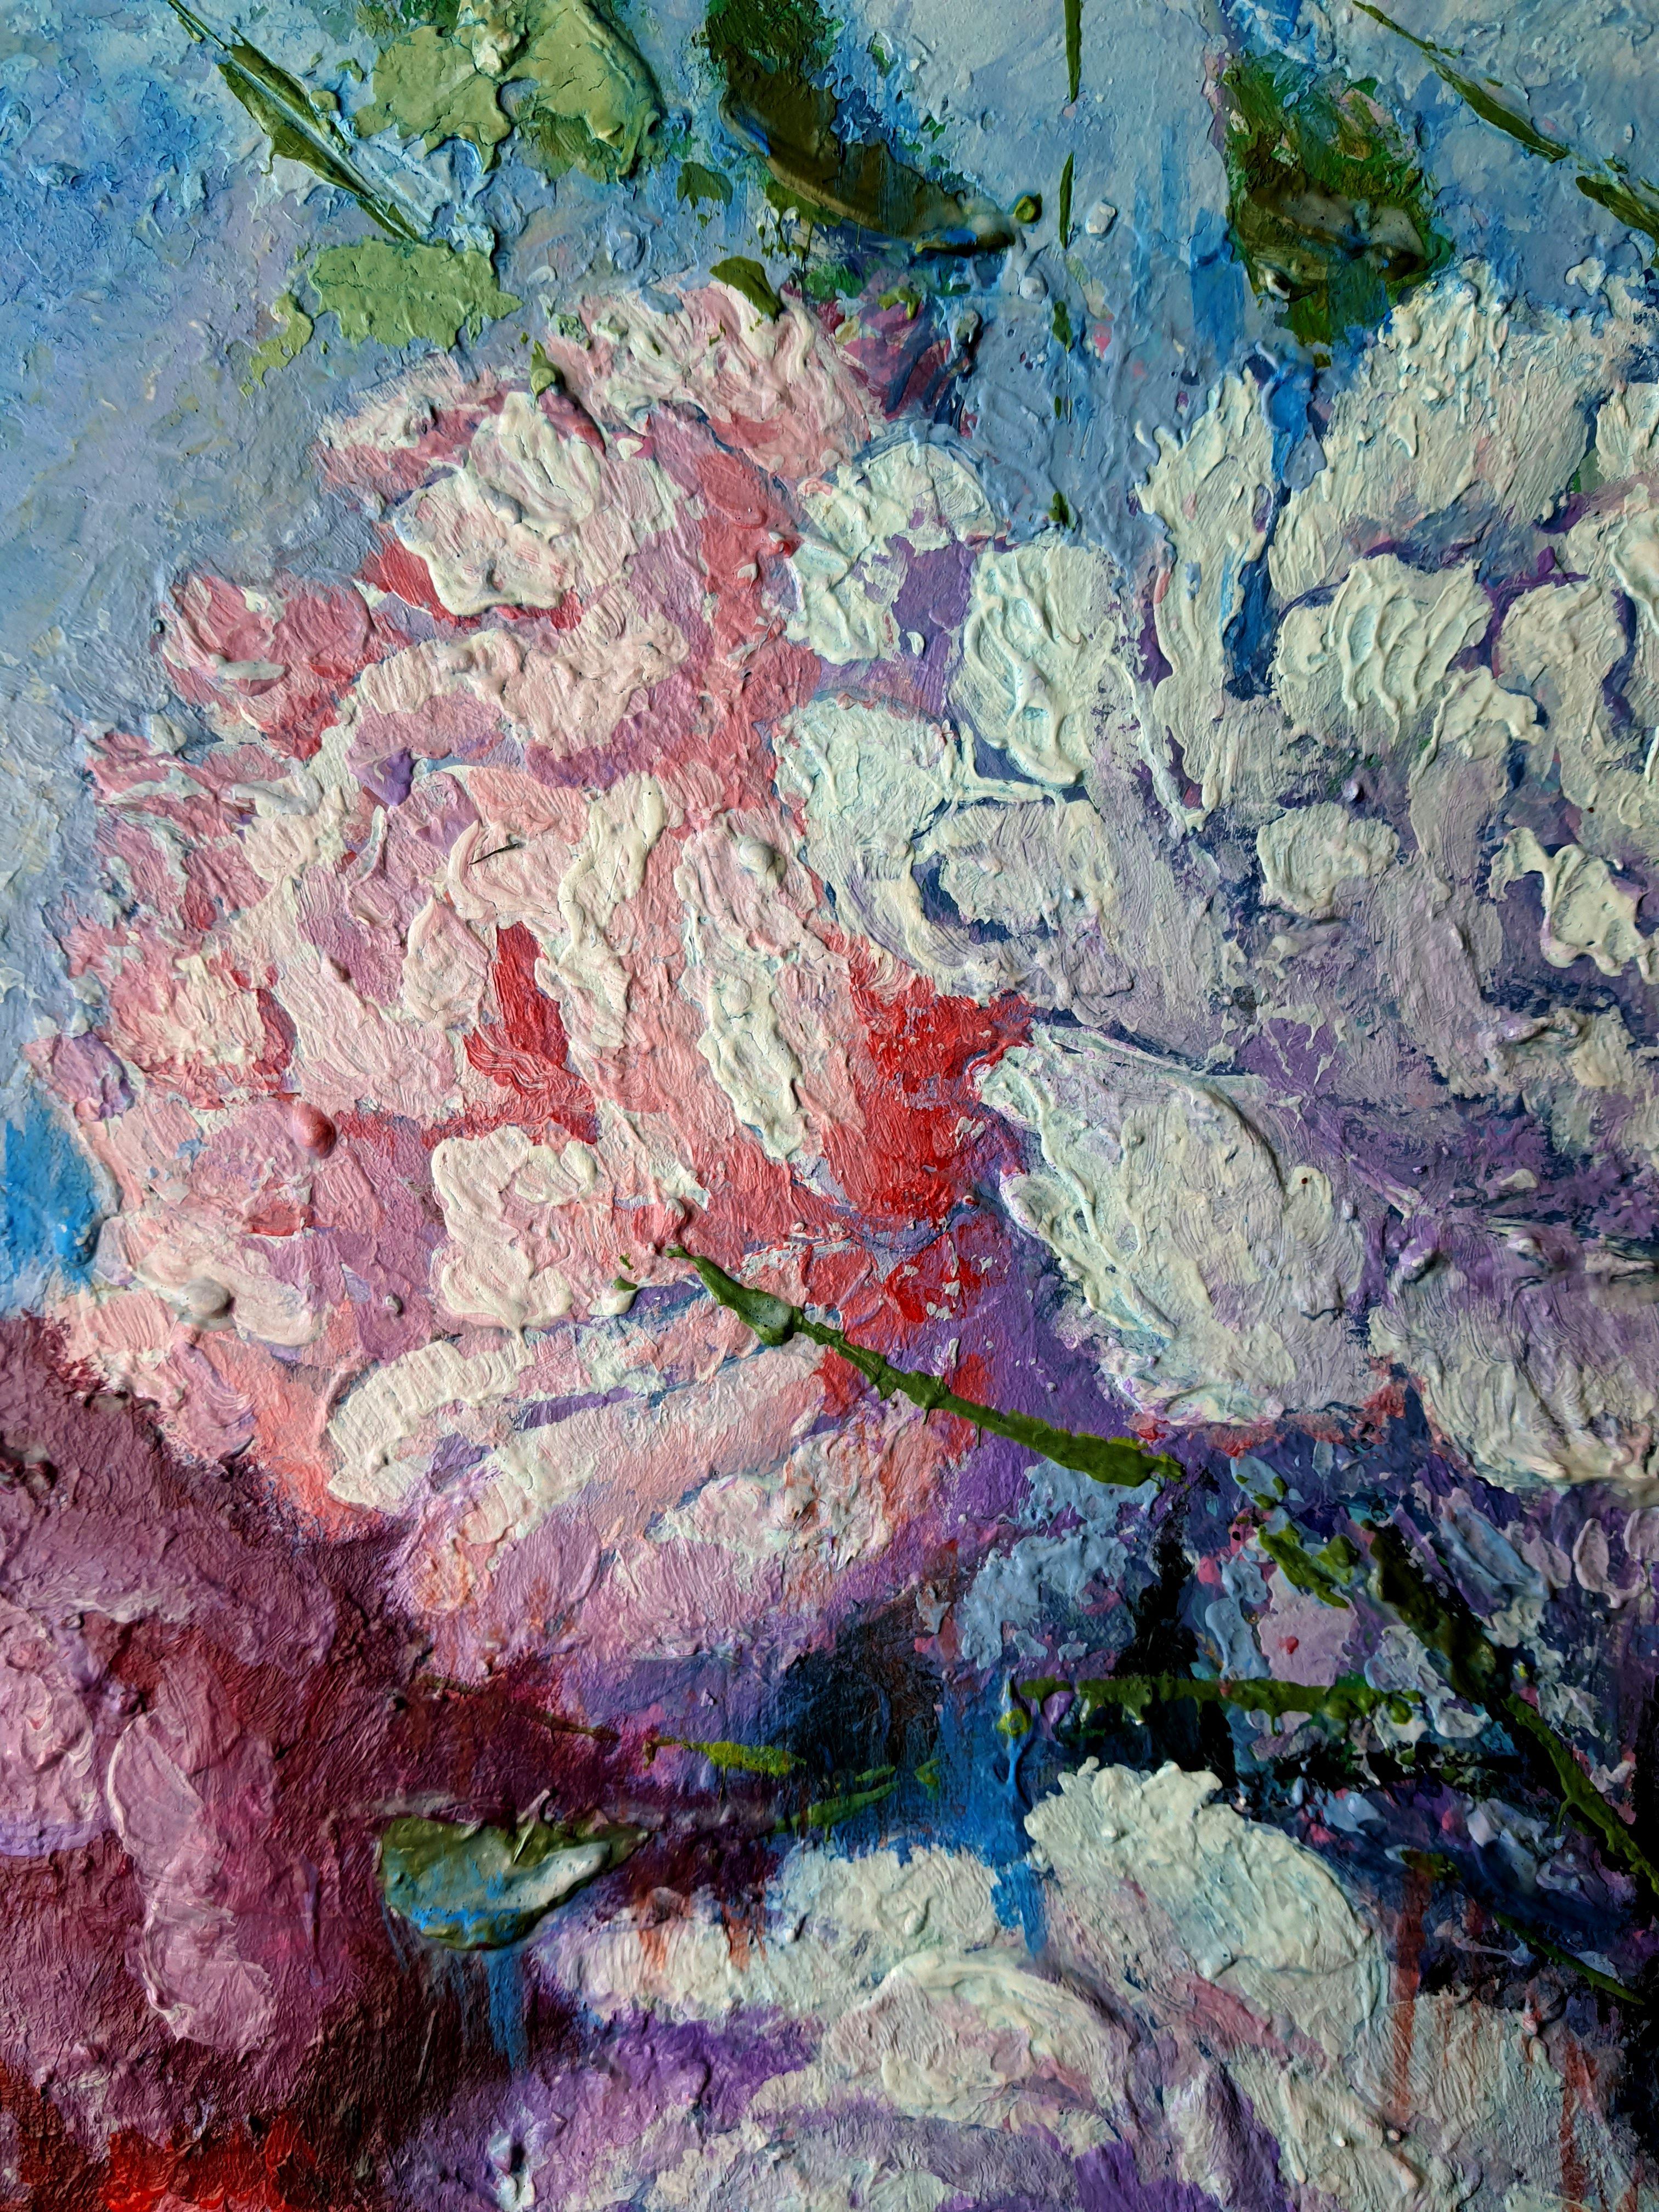 Infused with the vibrancy of acrylics, the depth of oils, and the texture of oil pastels, I've created a piece that dances between expressionism and impressionism. My brushstrokes capture the wild essence of florals juxtaposed with the tranquility